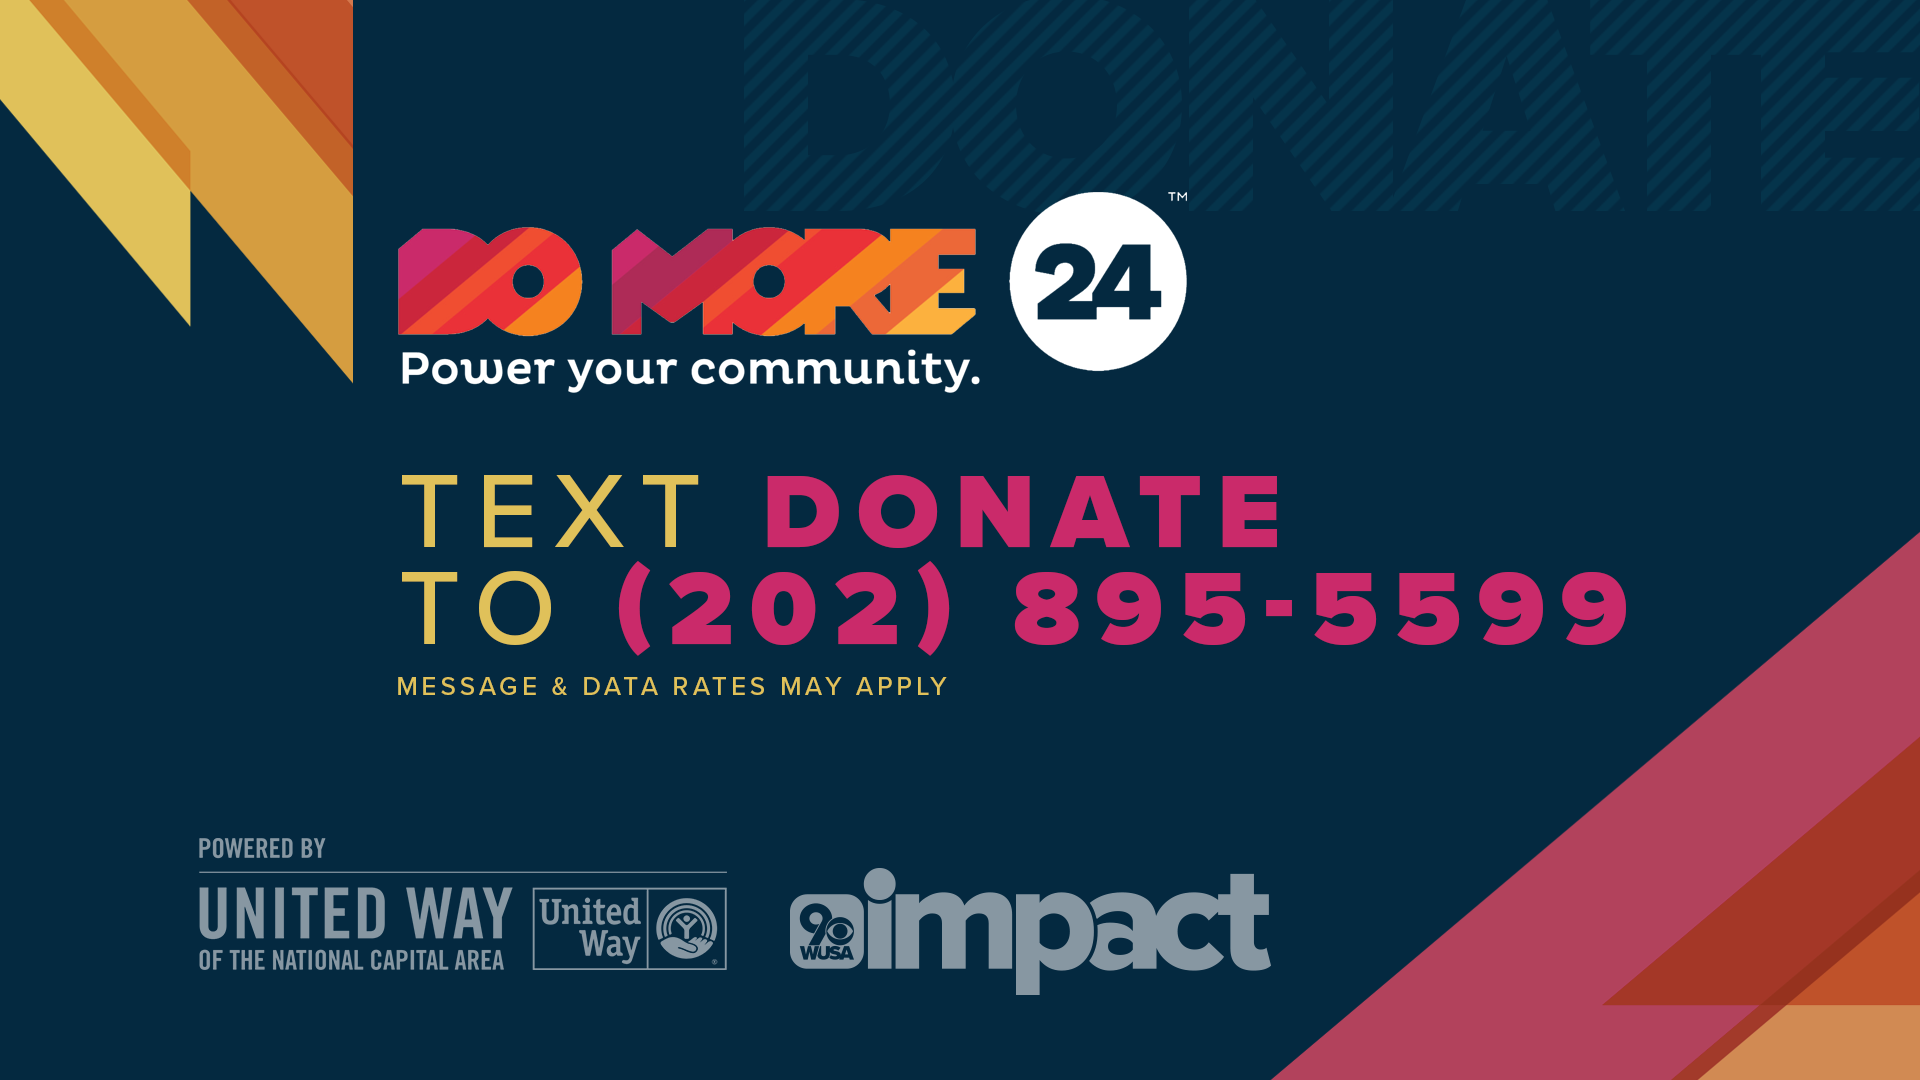 You can help Project Homeless Connect and hundreds of other non-profits through United Way National Capital Area's Do More 24.